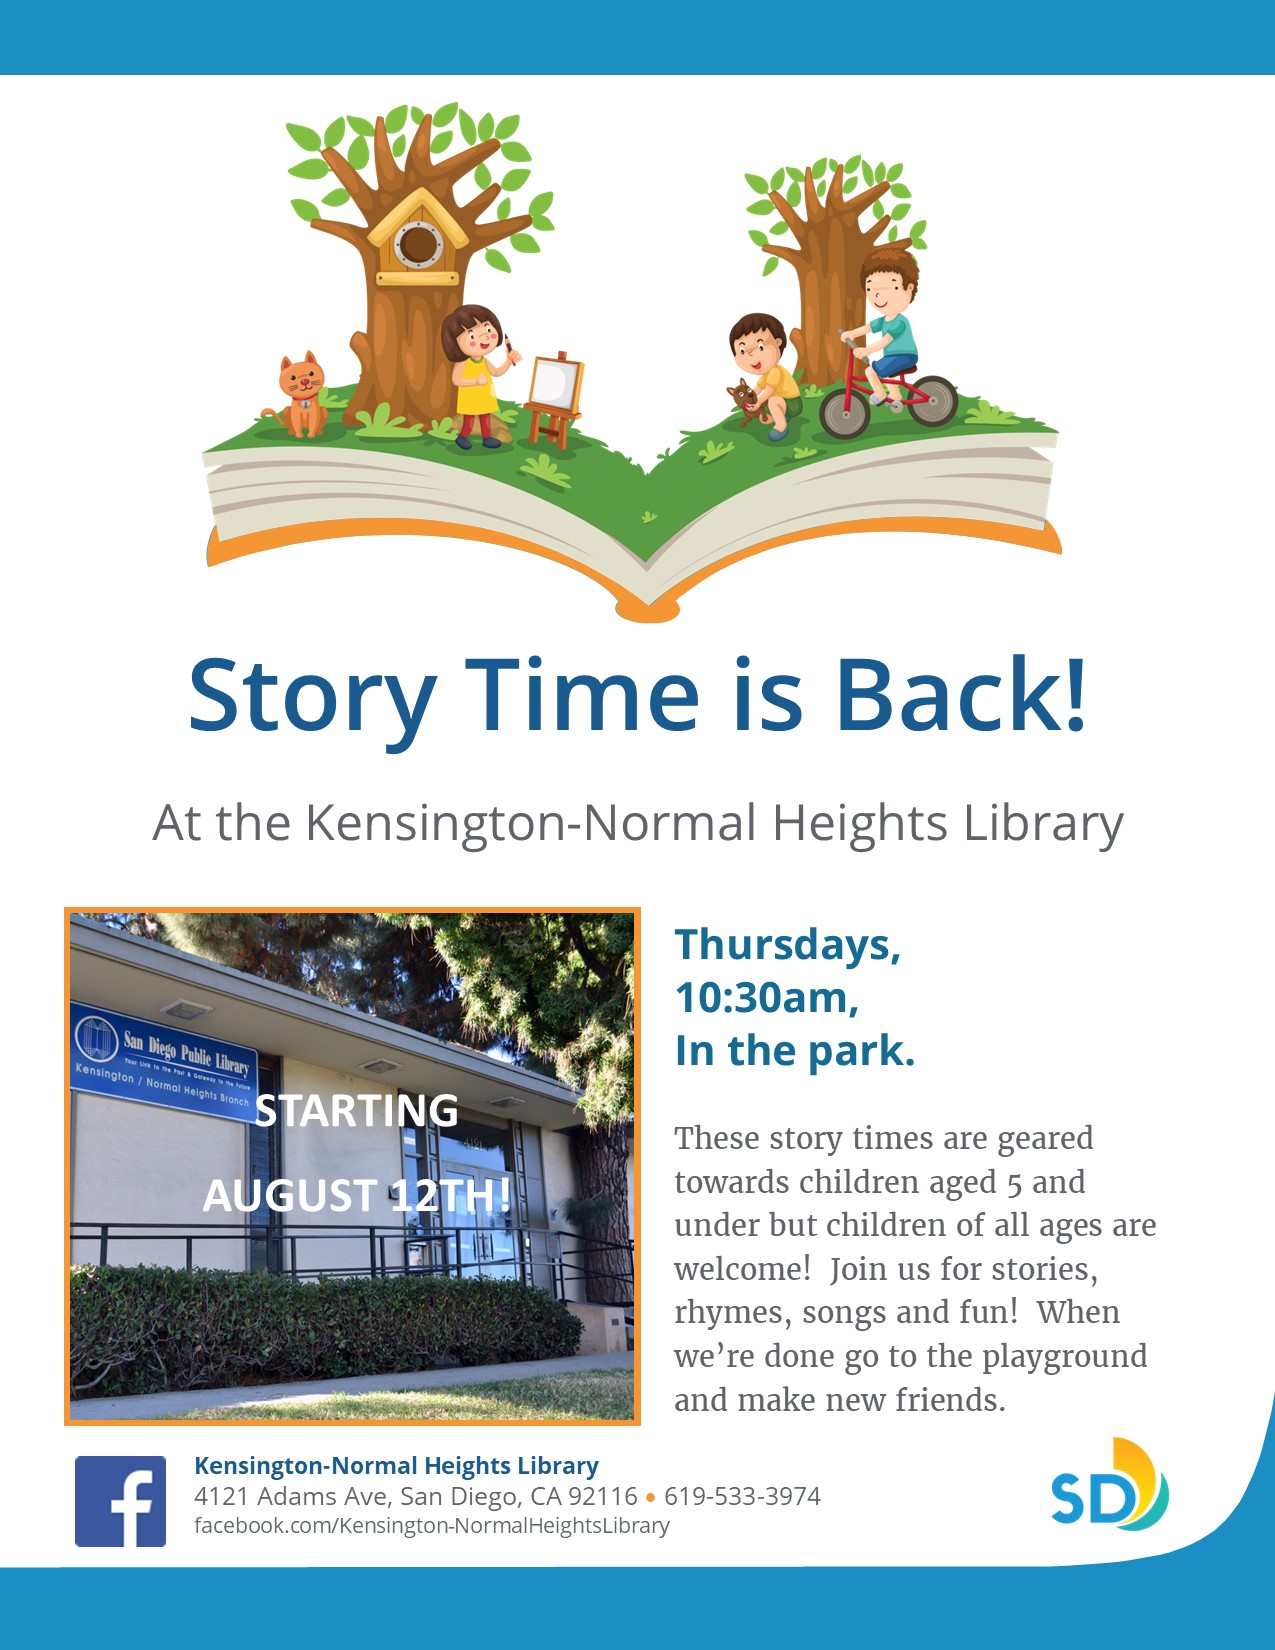 Story Time in the Park San Diego Public Library